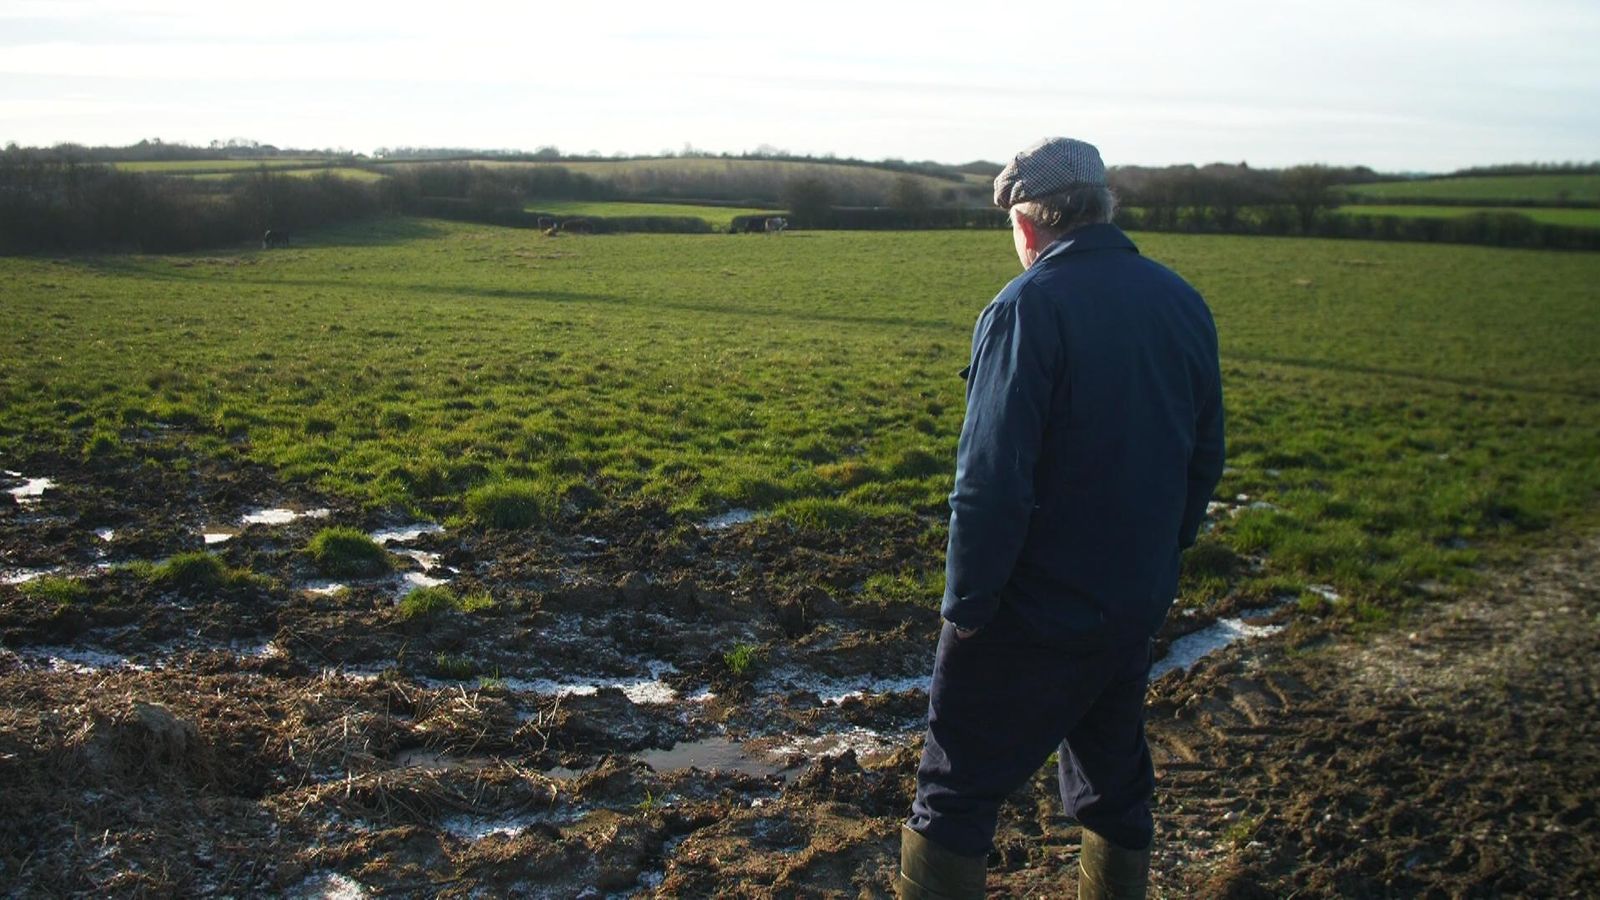 'Our old way of life will be gone forever': The tenant farmers targeted by solar developers